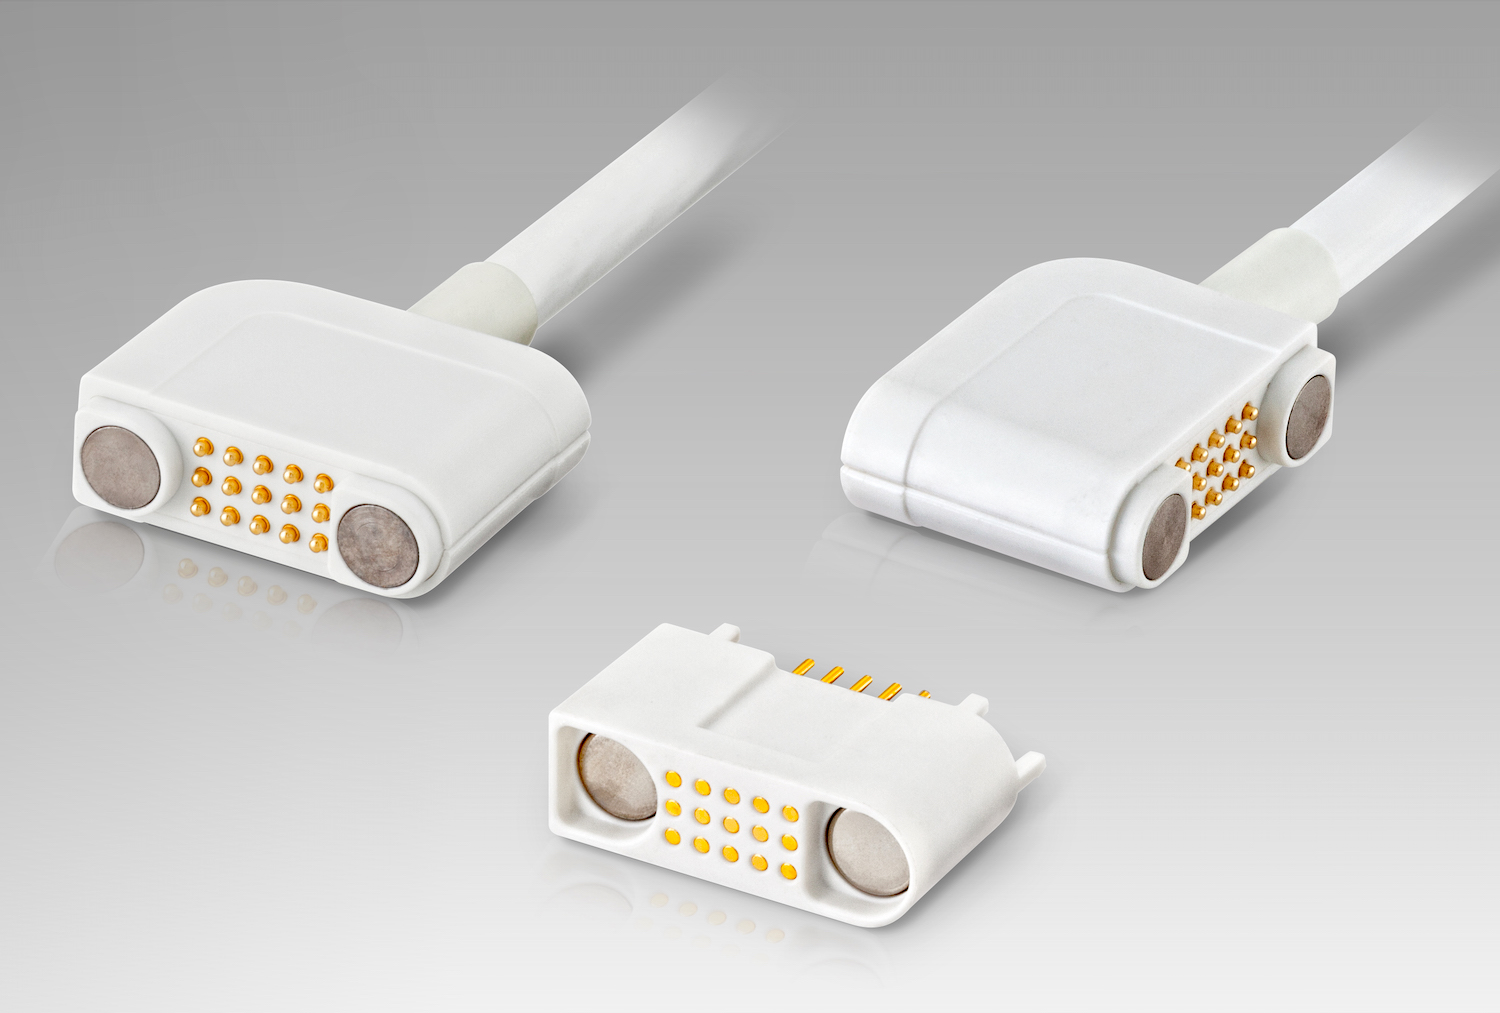 Hybrid Power and Signal Connector Products from Rosenberger